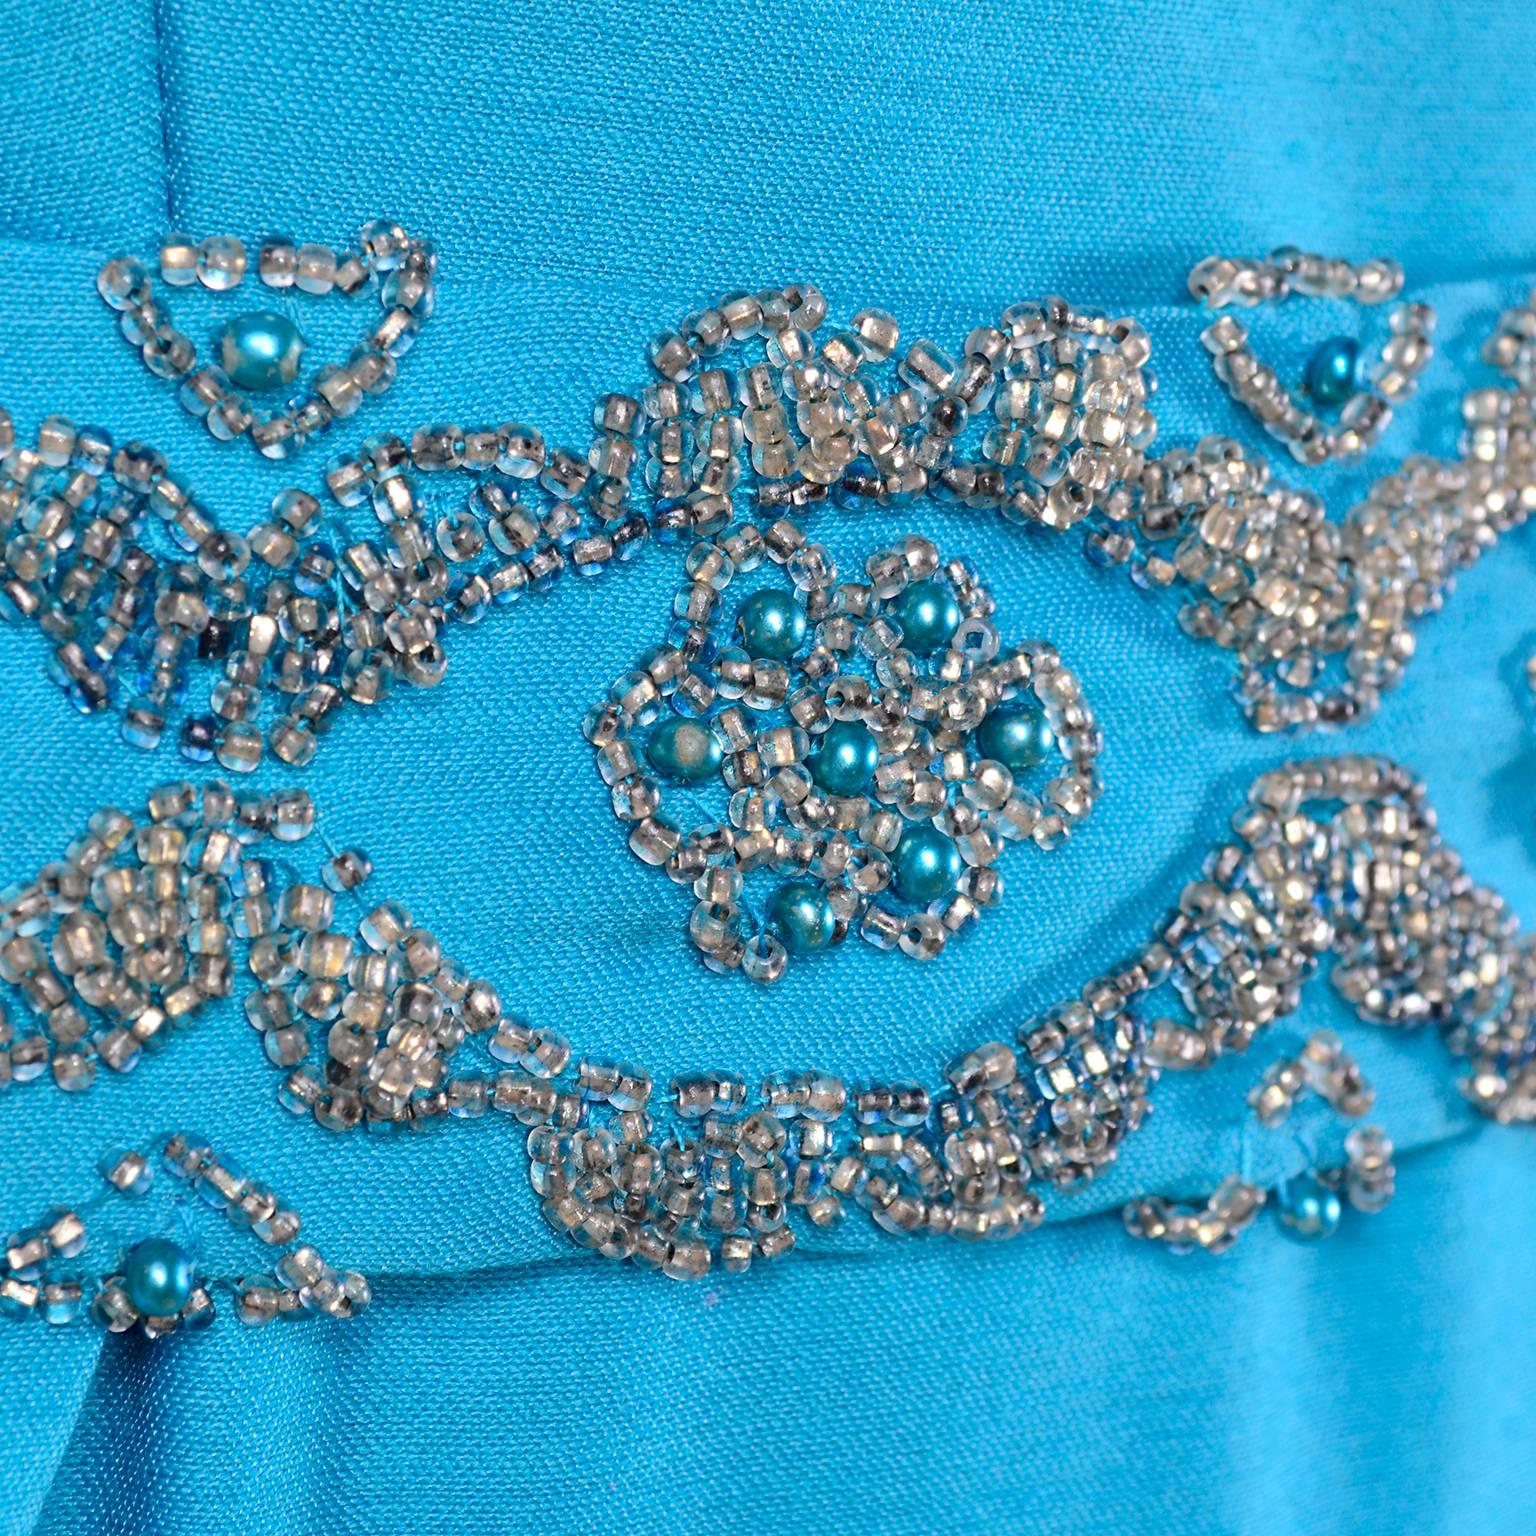 Blue Silk Beaded Suzy Perette Vintage Cape Dress W/ Removable Back Panel  In Excellent Condition For Sale In Portland, OR